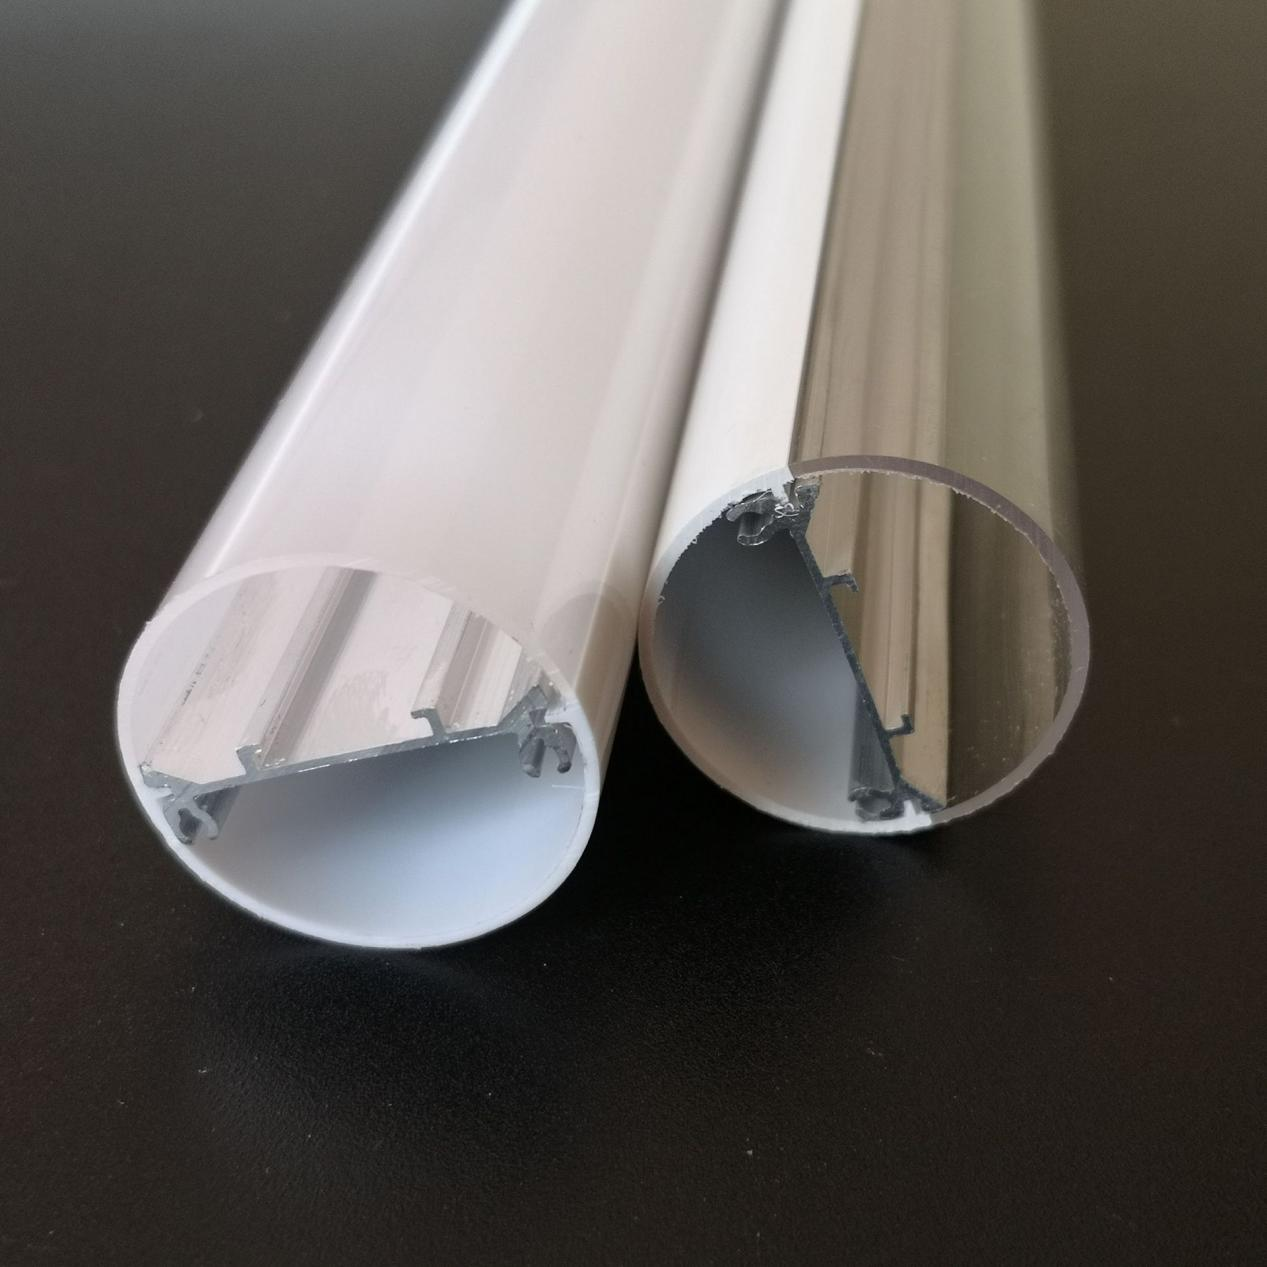 What is the function of LED tube diffuser?